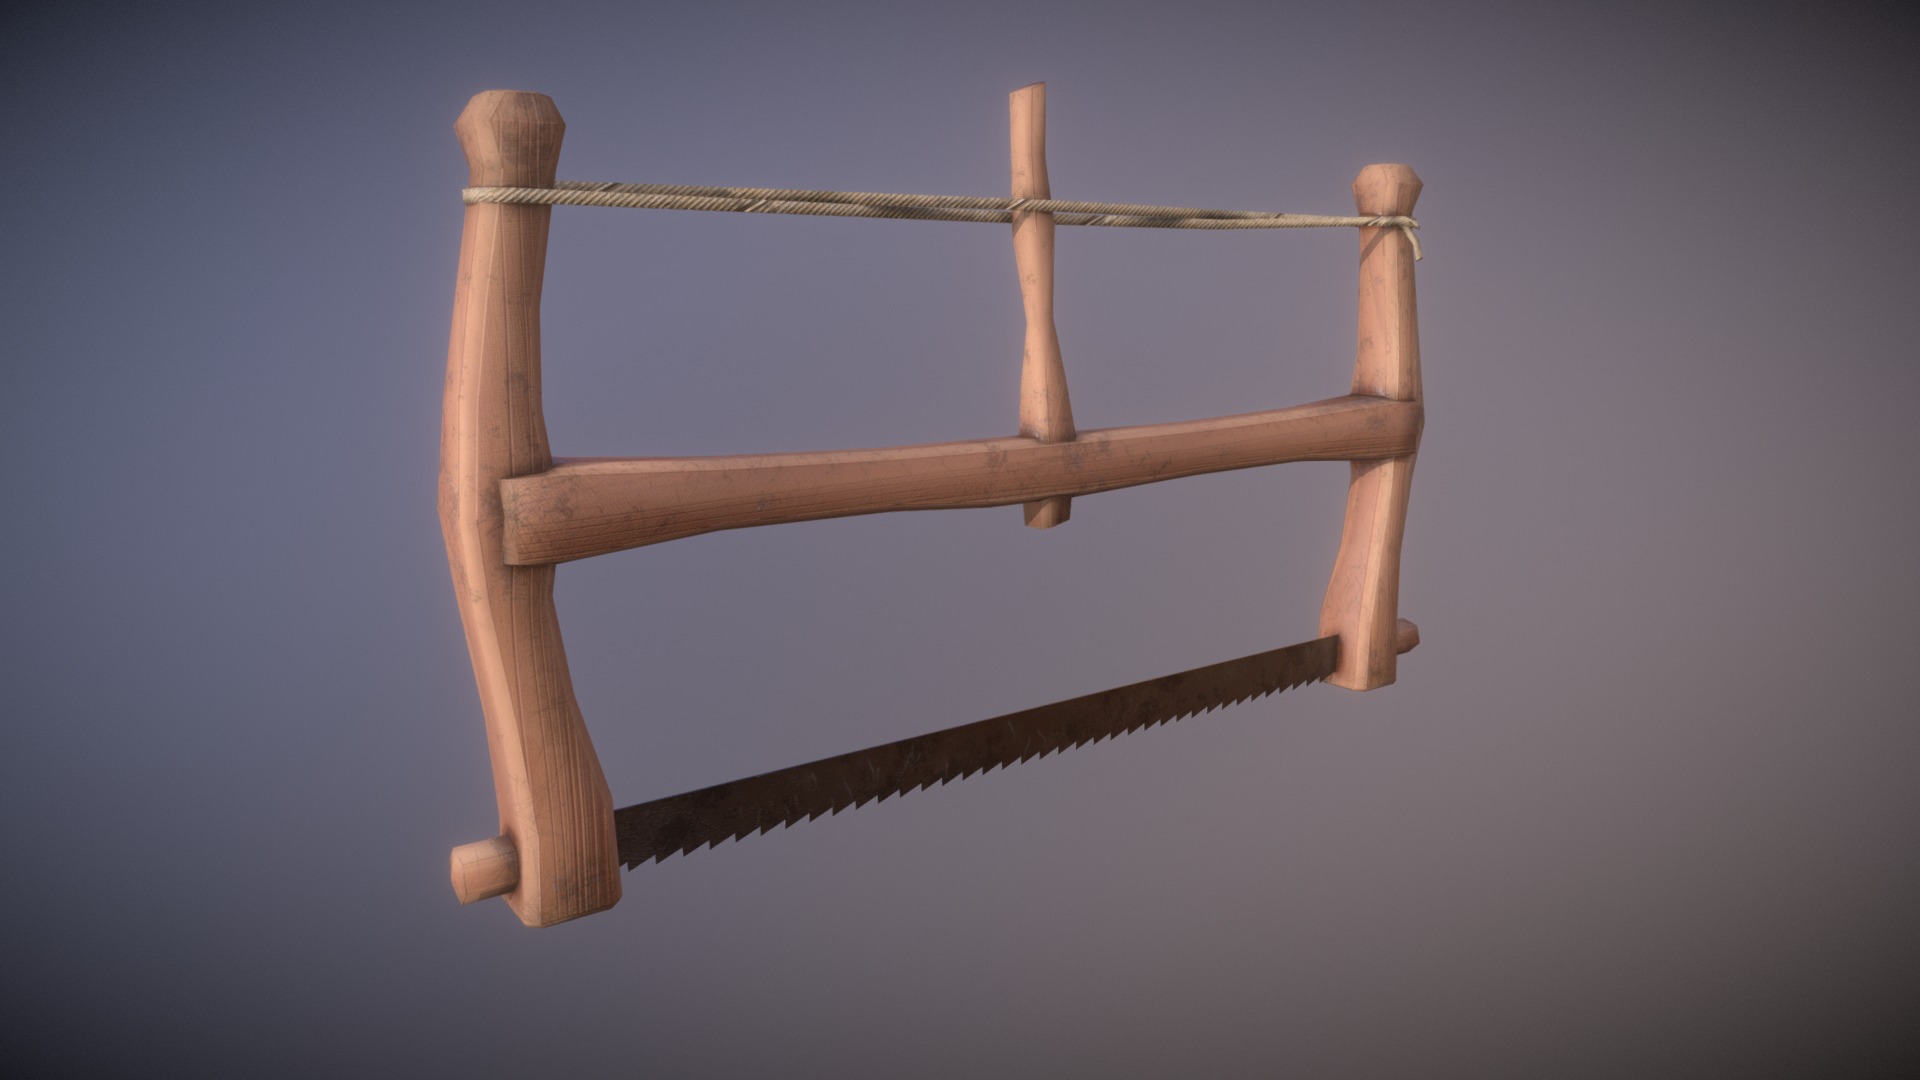 3D model Game Ready Old Saw Low Poly - This is a 3D model of the Game Ready Old Saw Low Poly. The 3D model is about a wooden chair with a wooden frame.